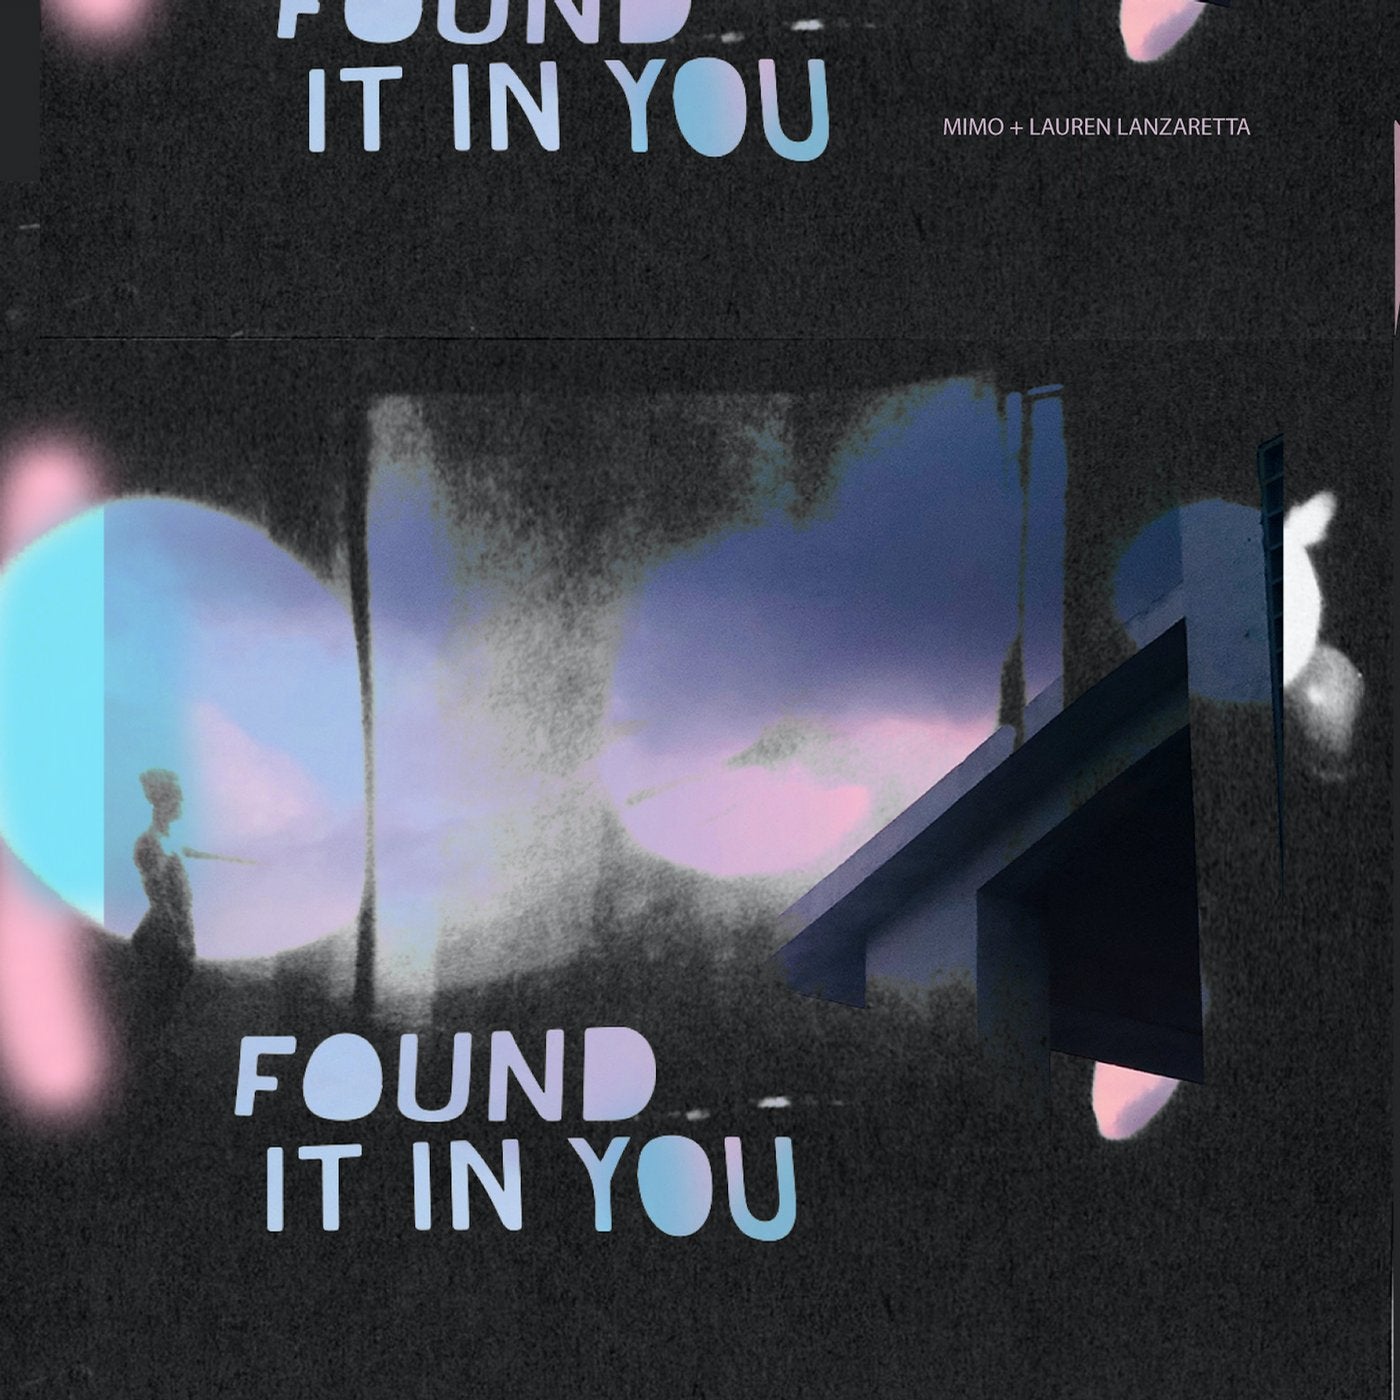 Found It In You